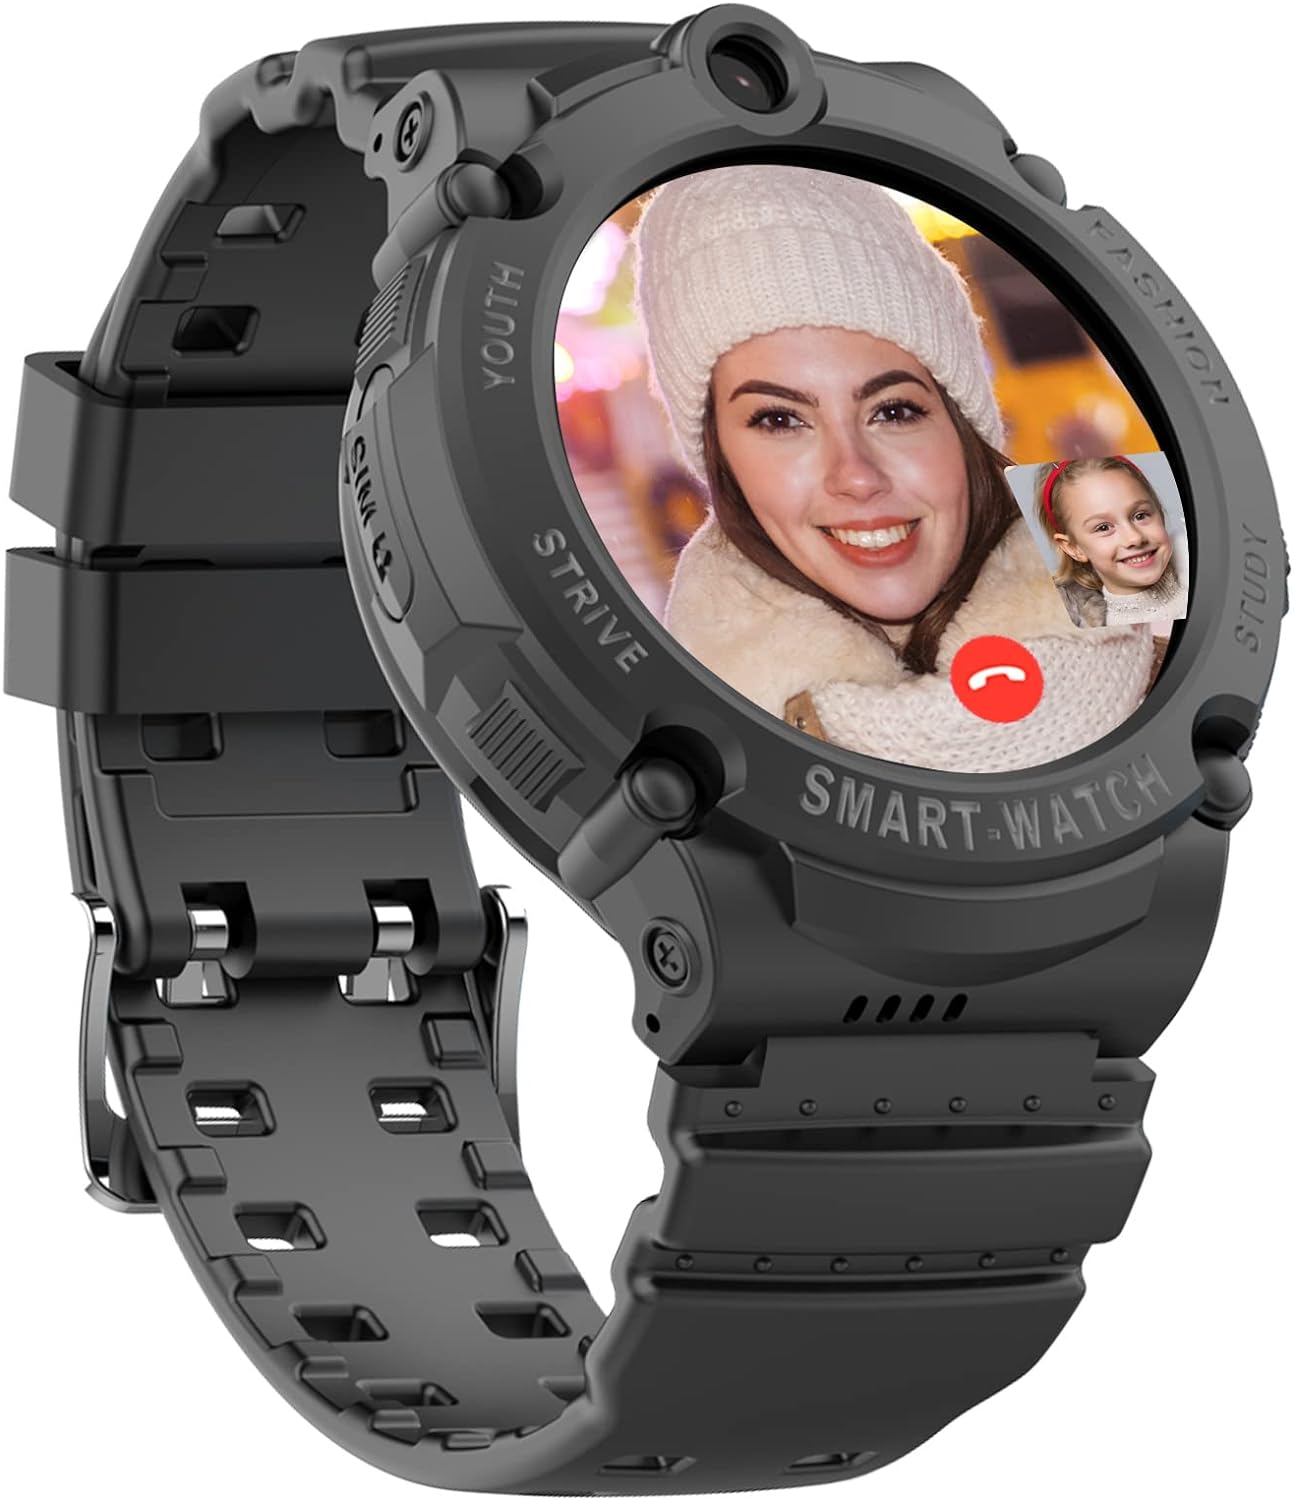 4G GPS Smartwatches for Kids